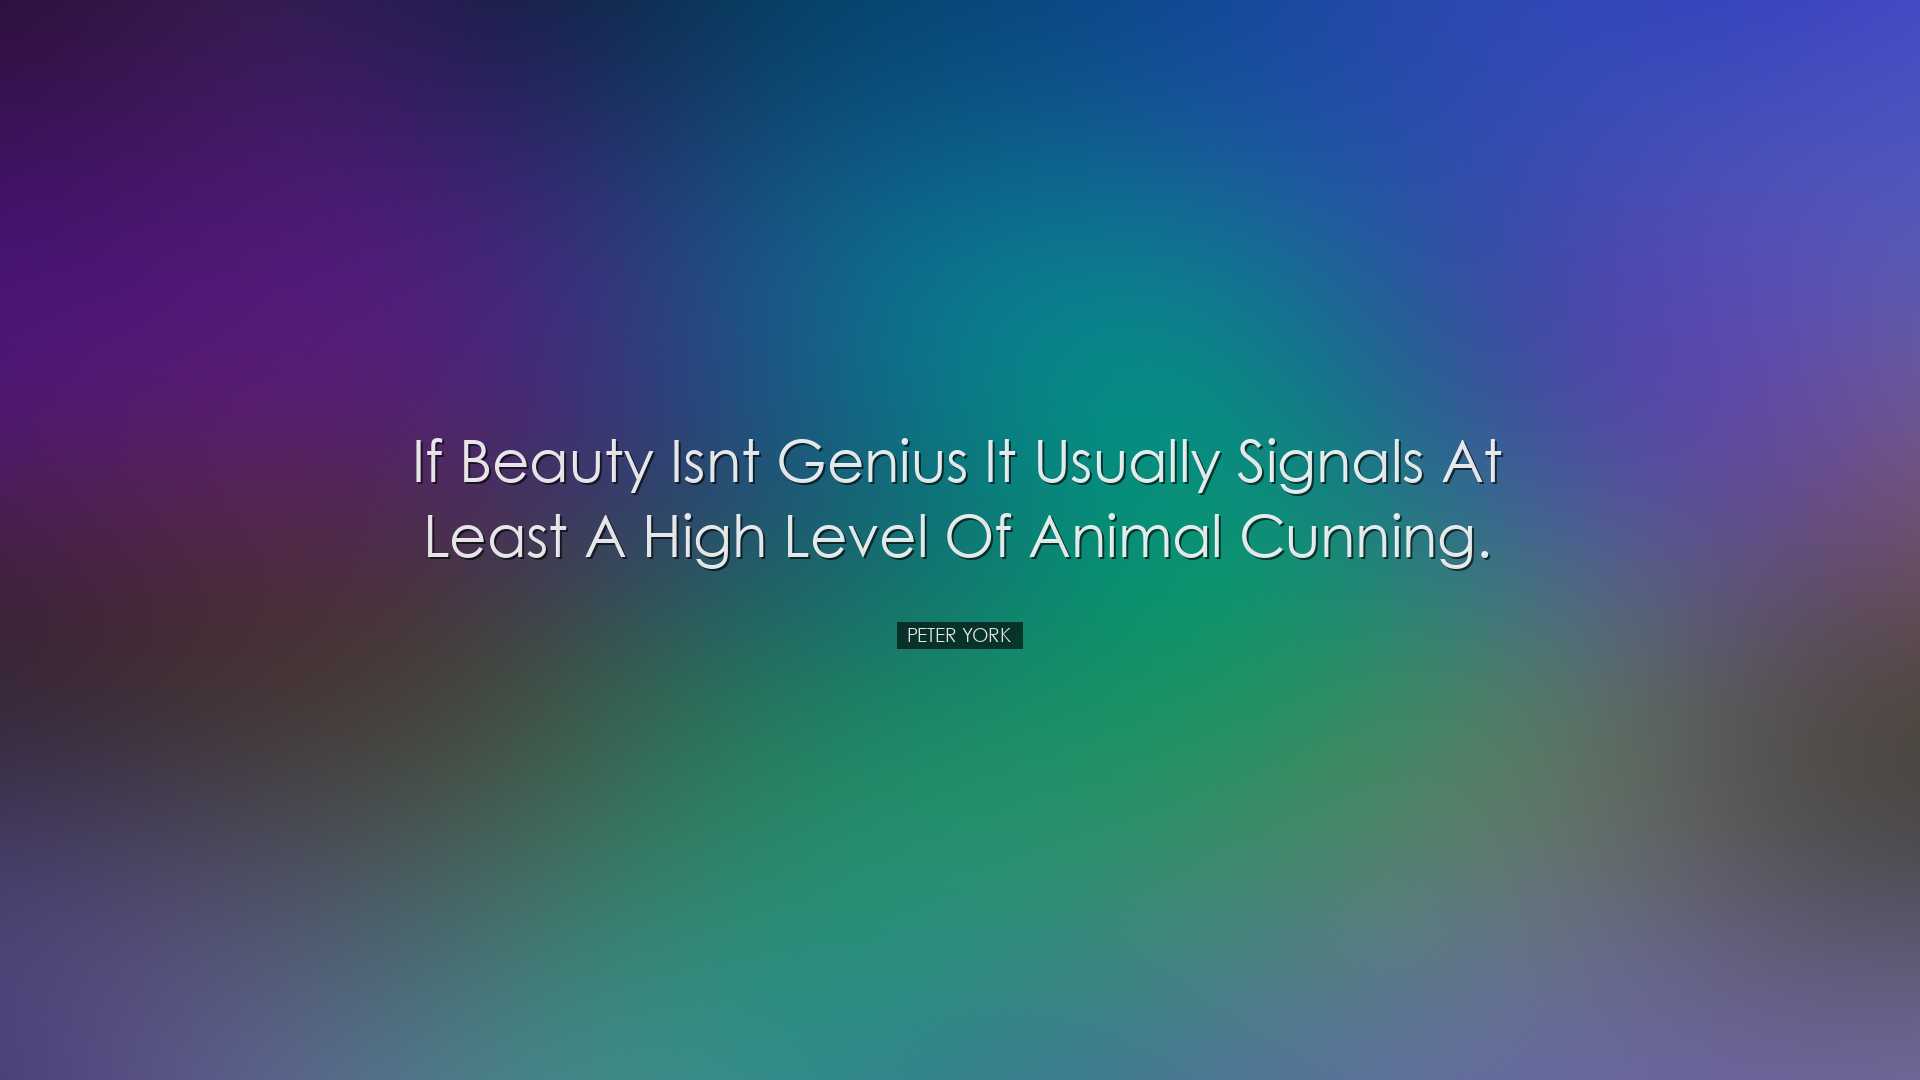 If beauty isnt genius it usually signals at least a high level of